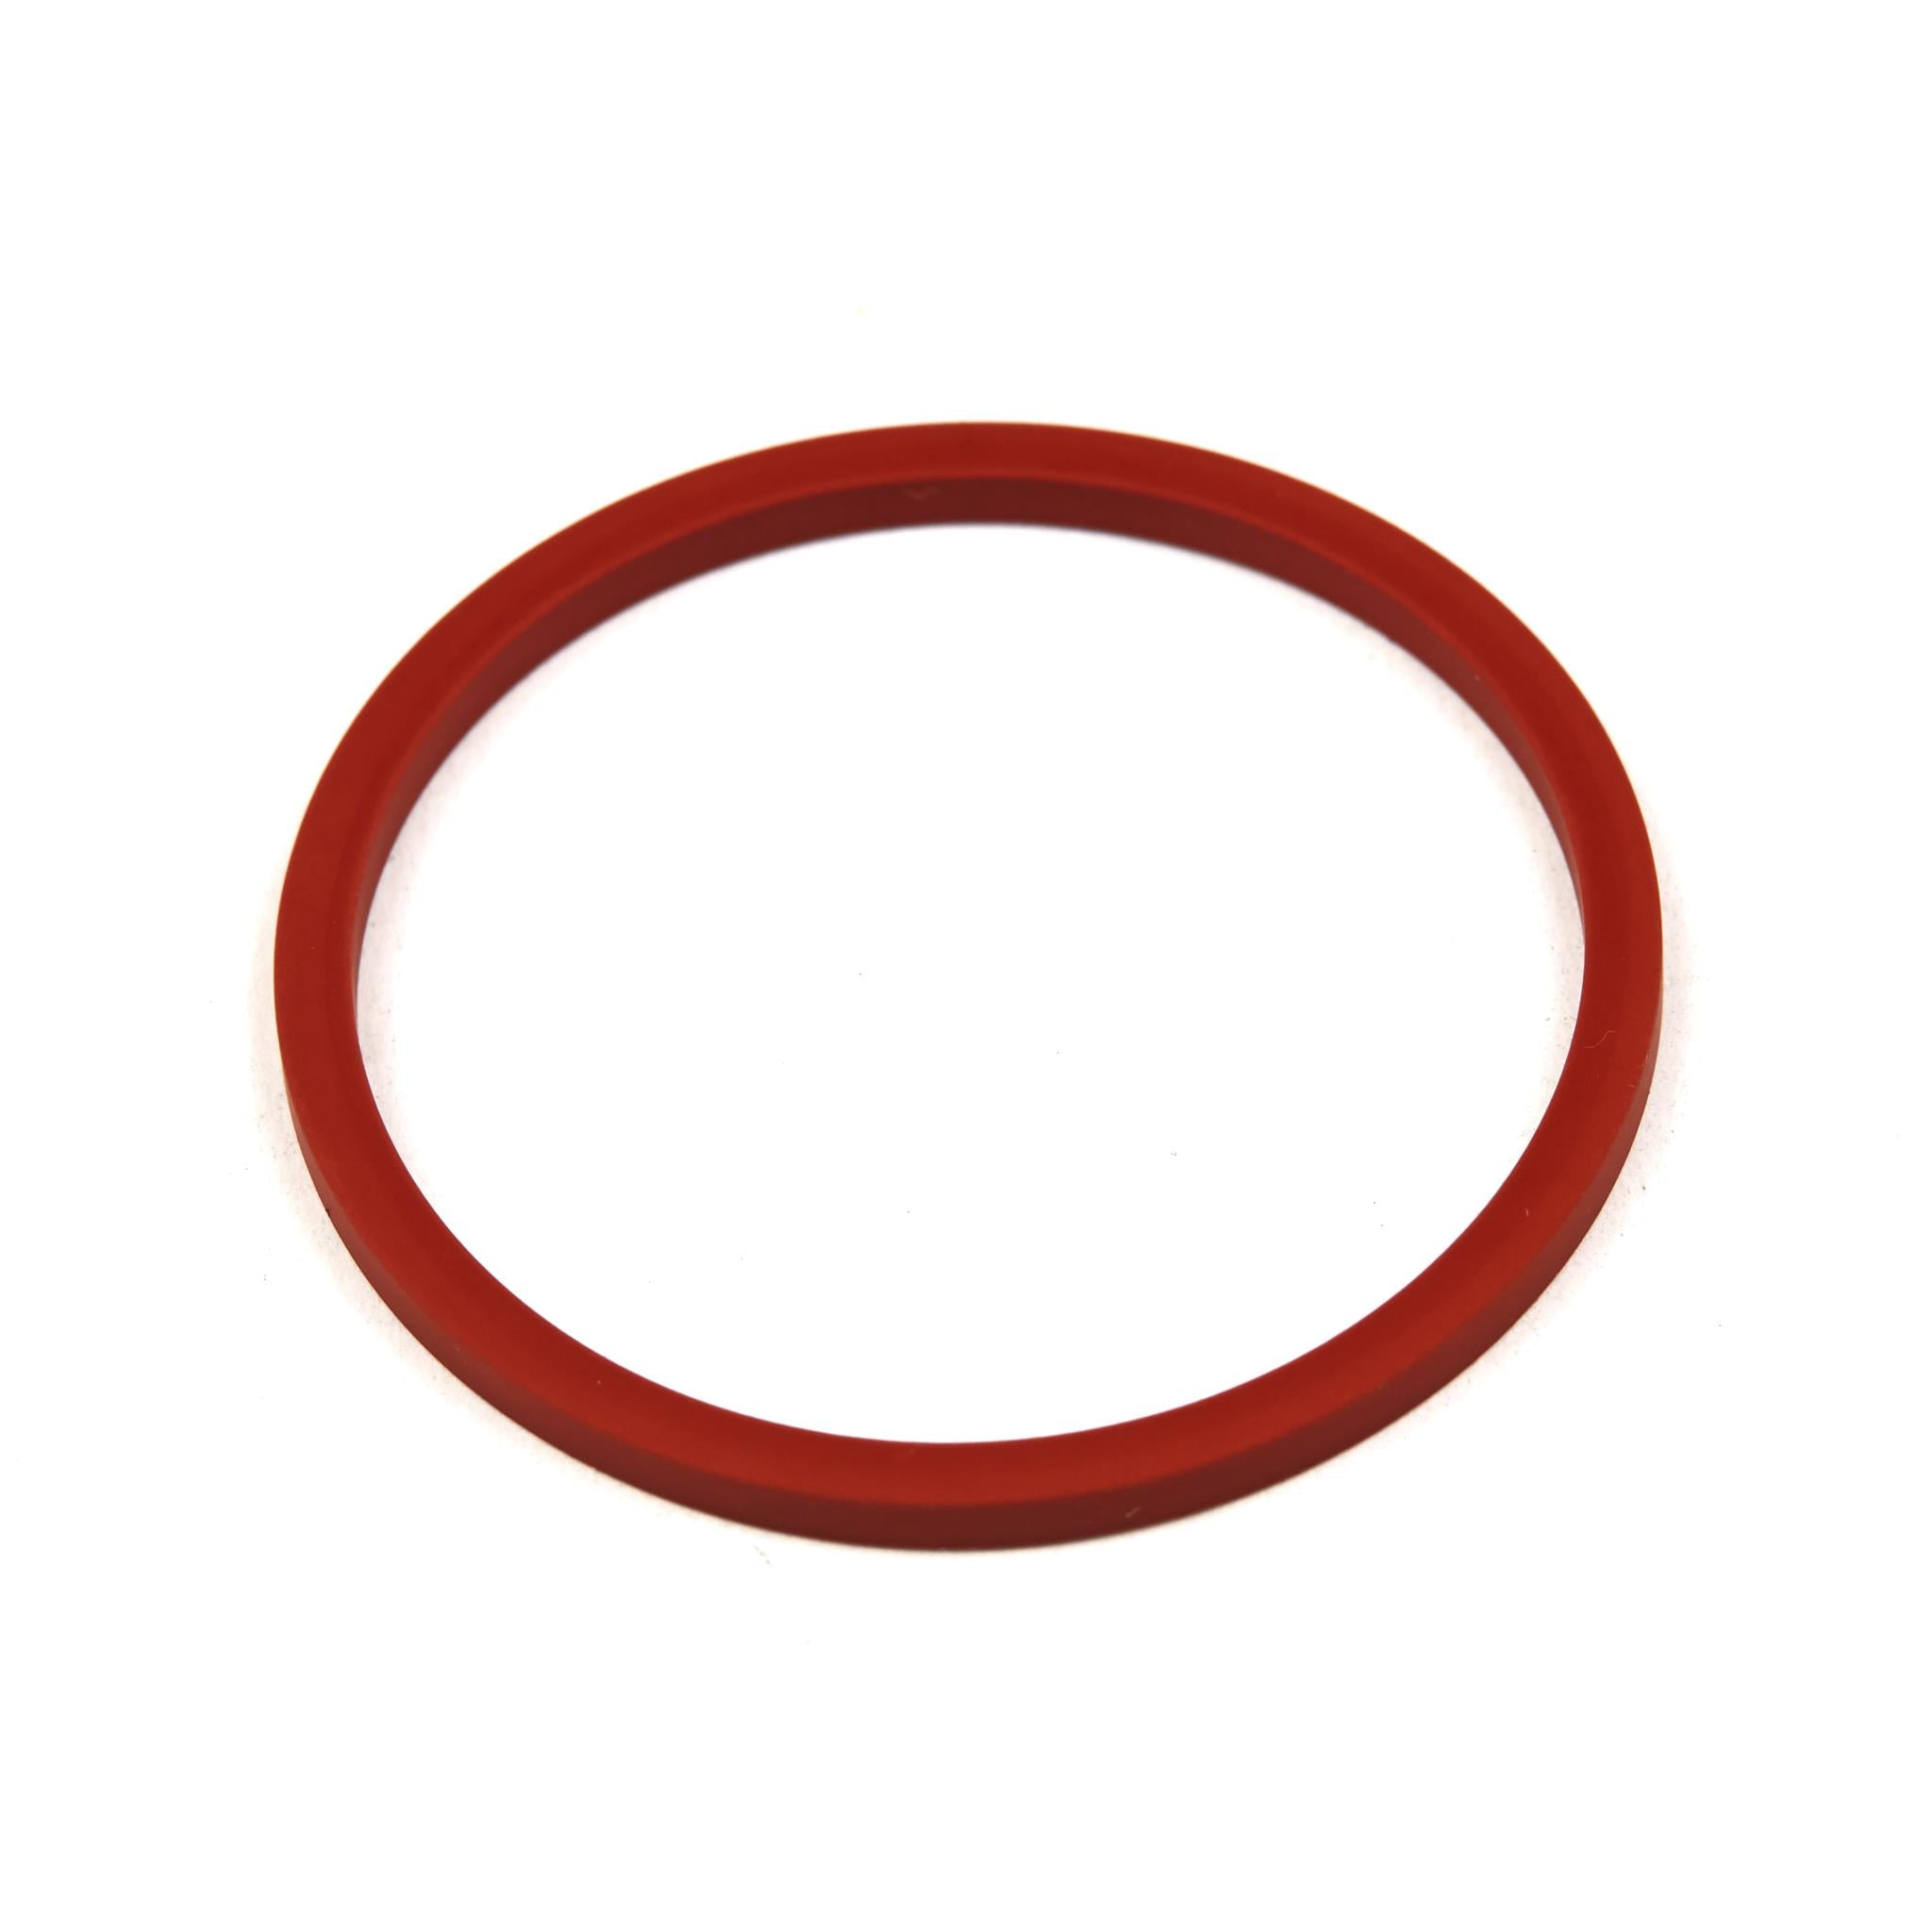 Unique Bargains 50 x Red Soft Rubber 12mm x 8mm x 2mm Oil Seal O Rings  Gaskets Washer - Walmart.com